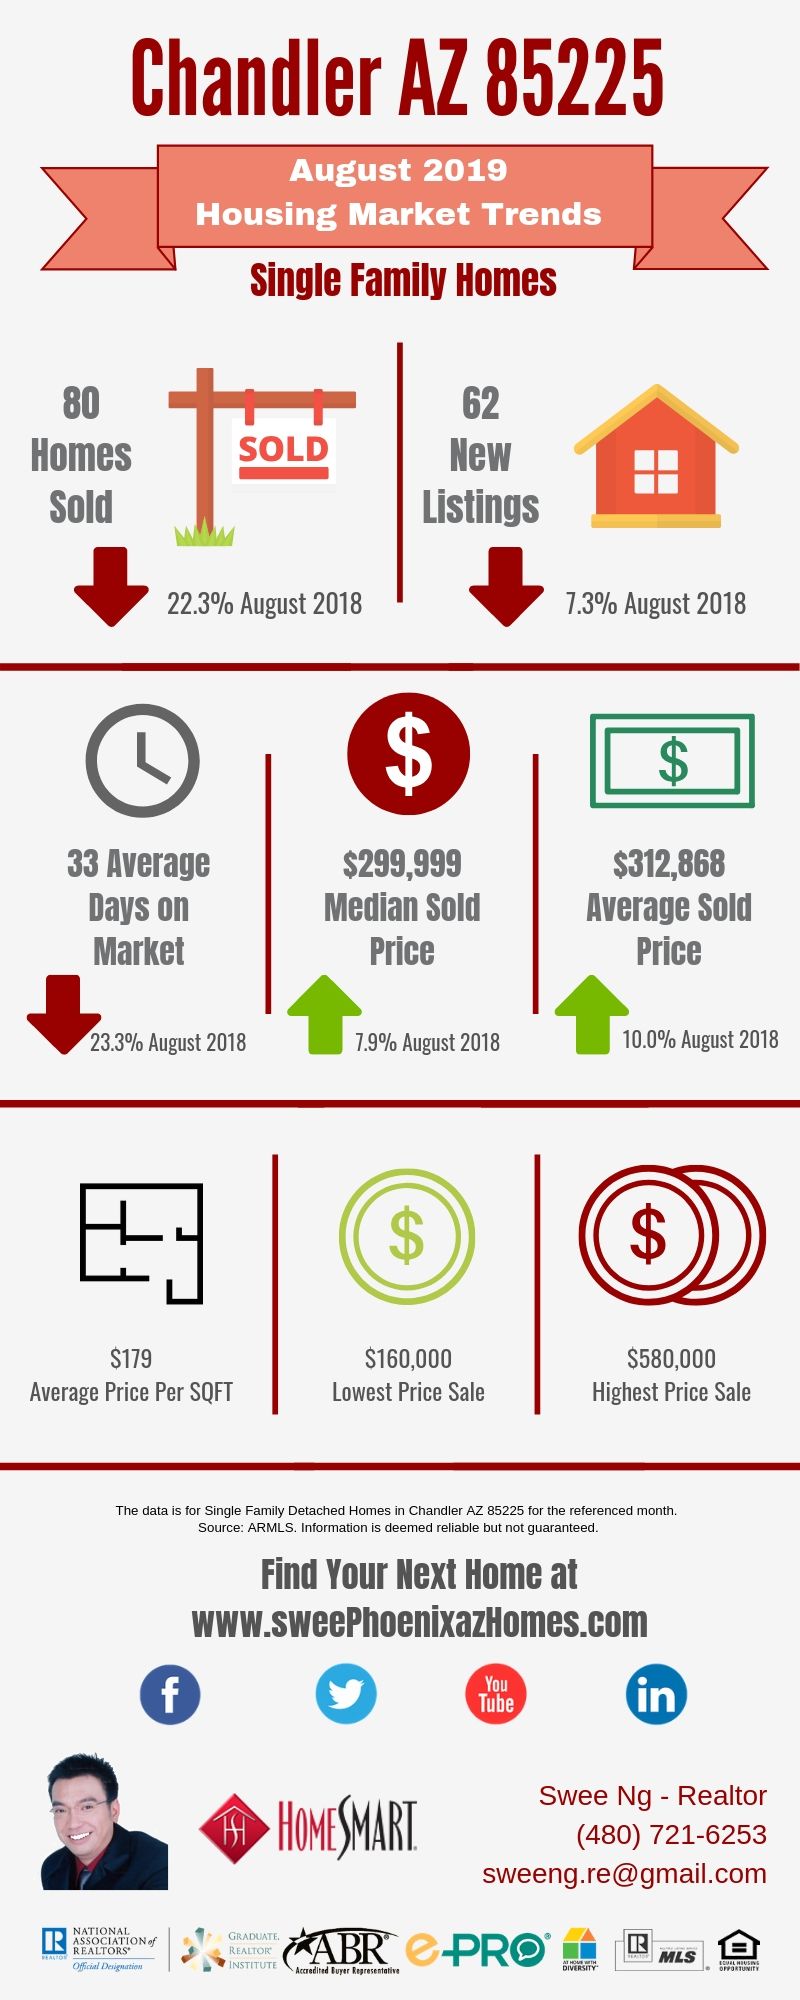 Chandler AZ 85225 Housing Market Trends Report August 2019, House Value, Real Estate and Statistic by Swee Ng